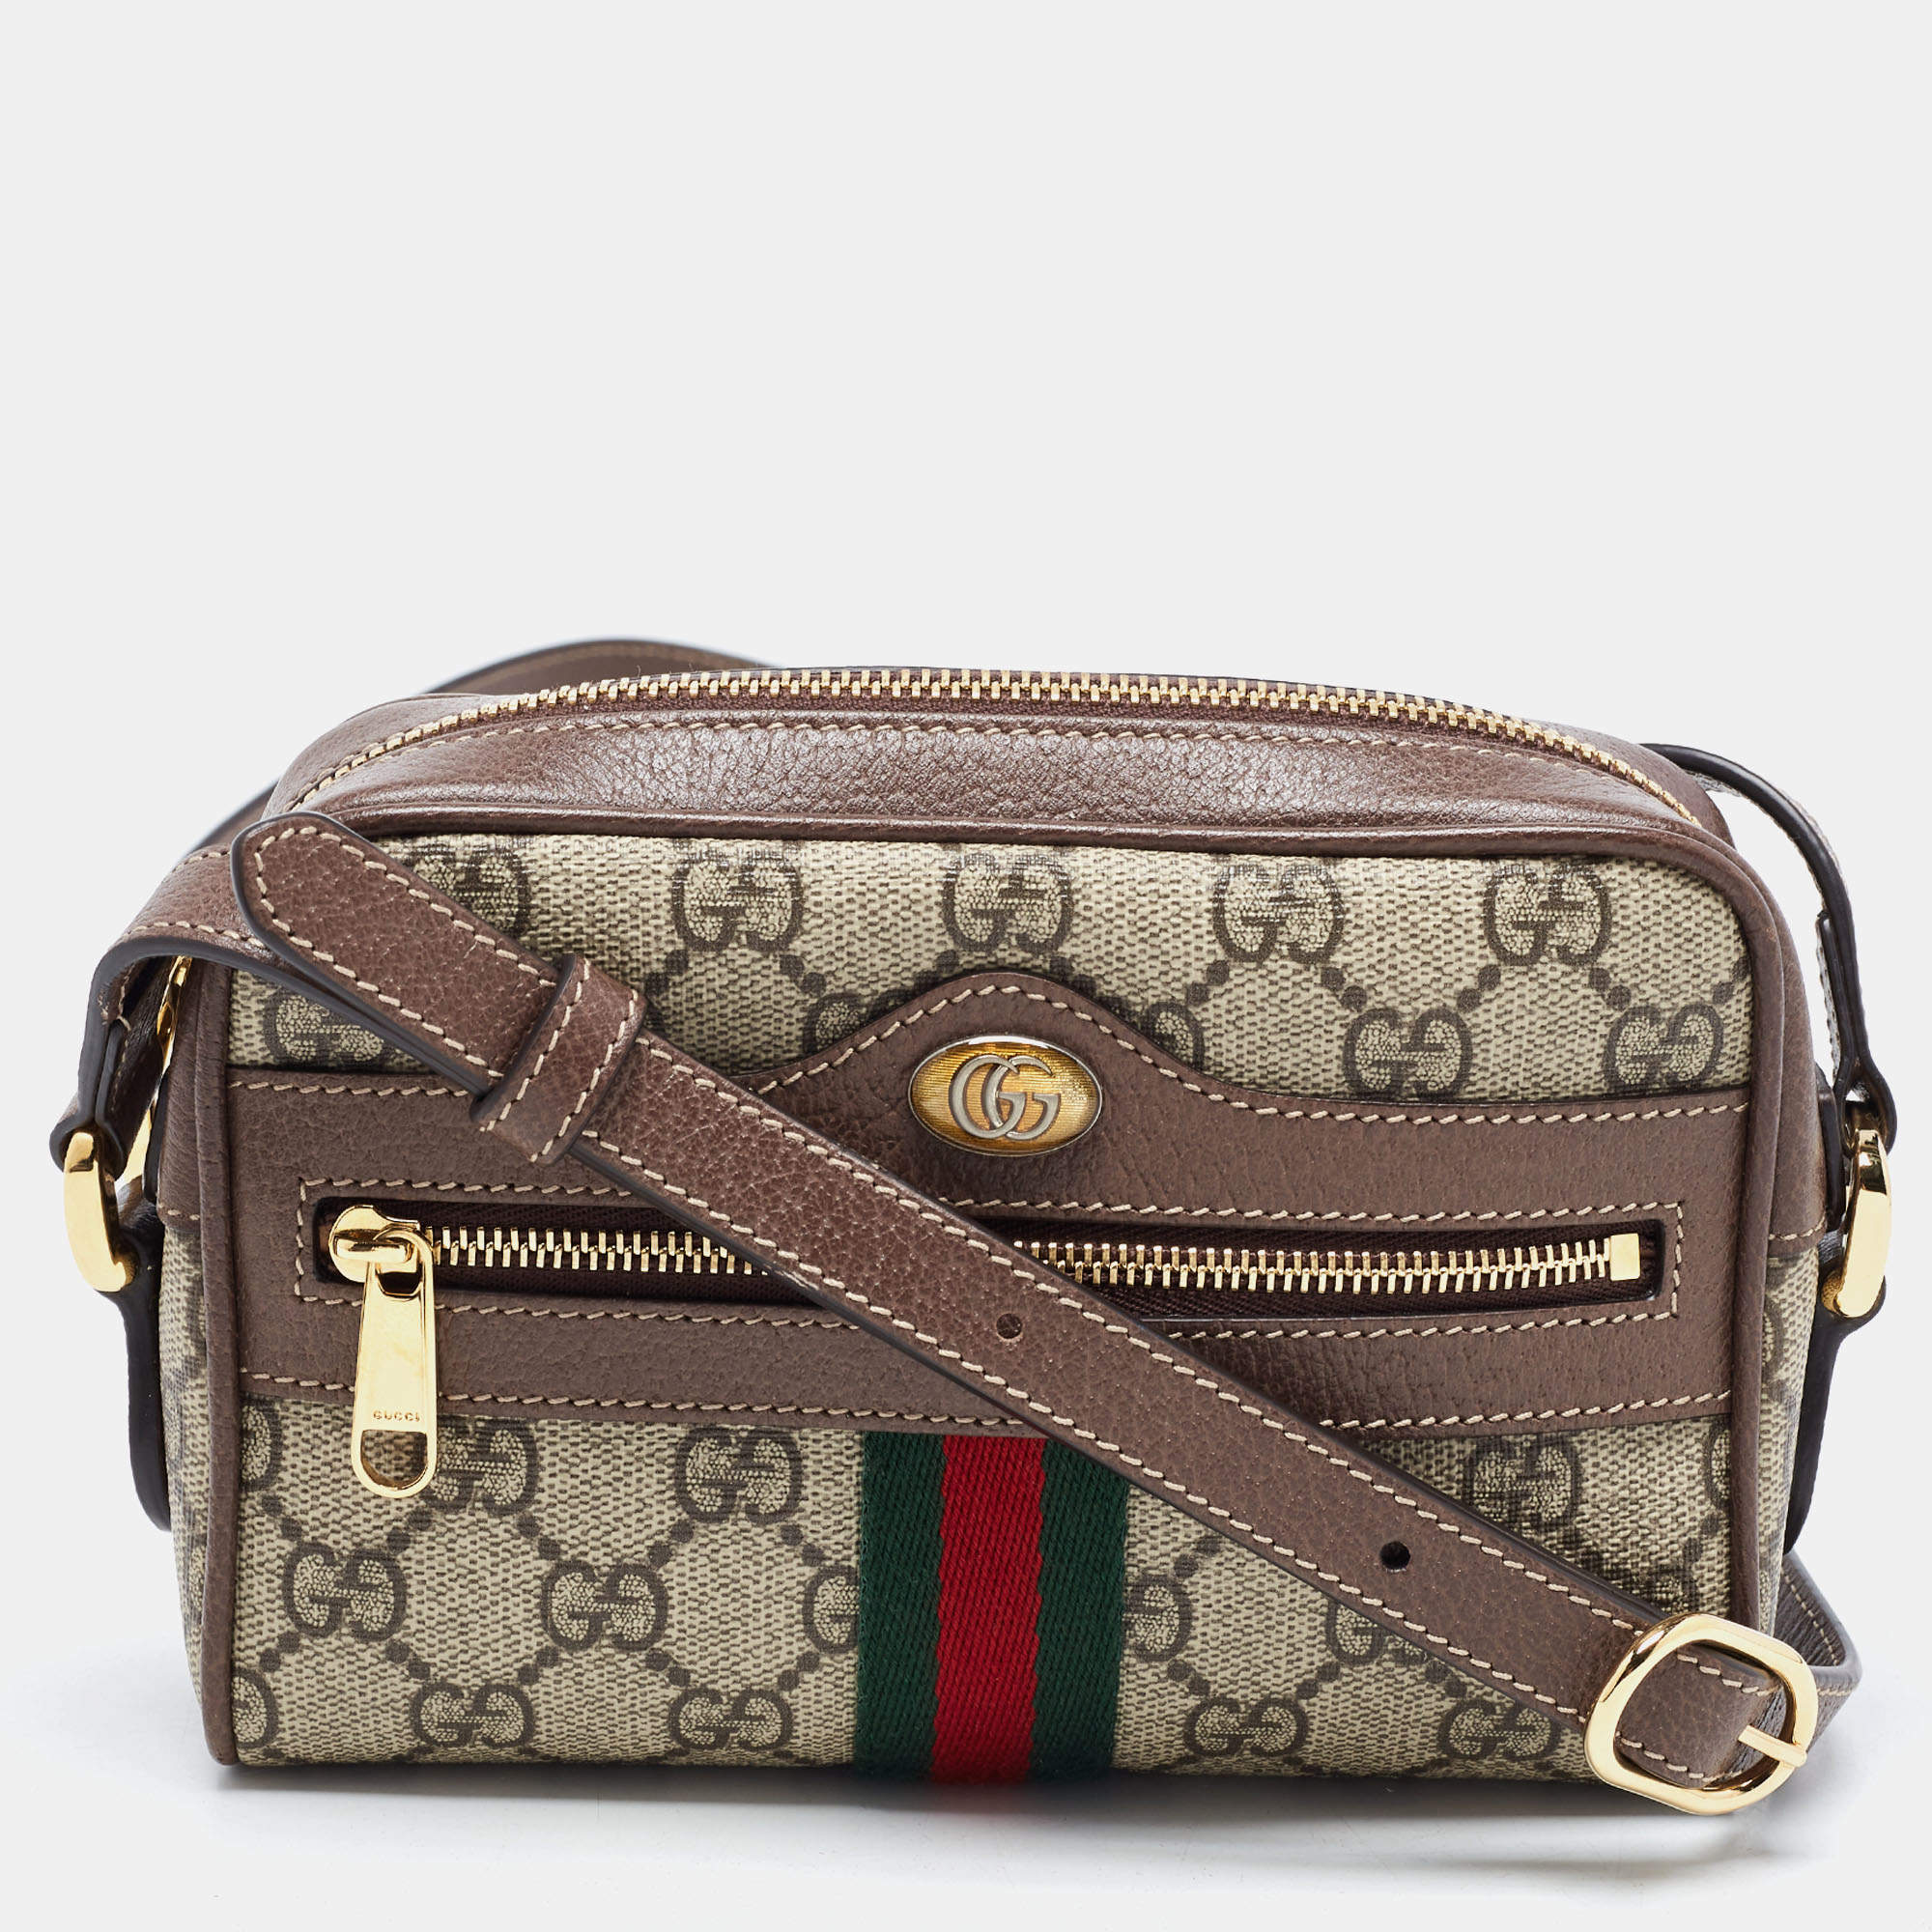 Gucci Beige GG Supreme Canvas and Leather Mini Ophidia Crossbody Bag